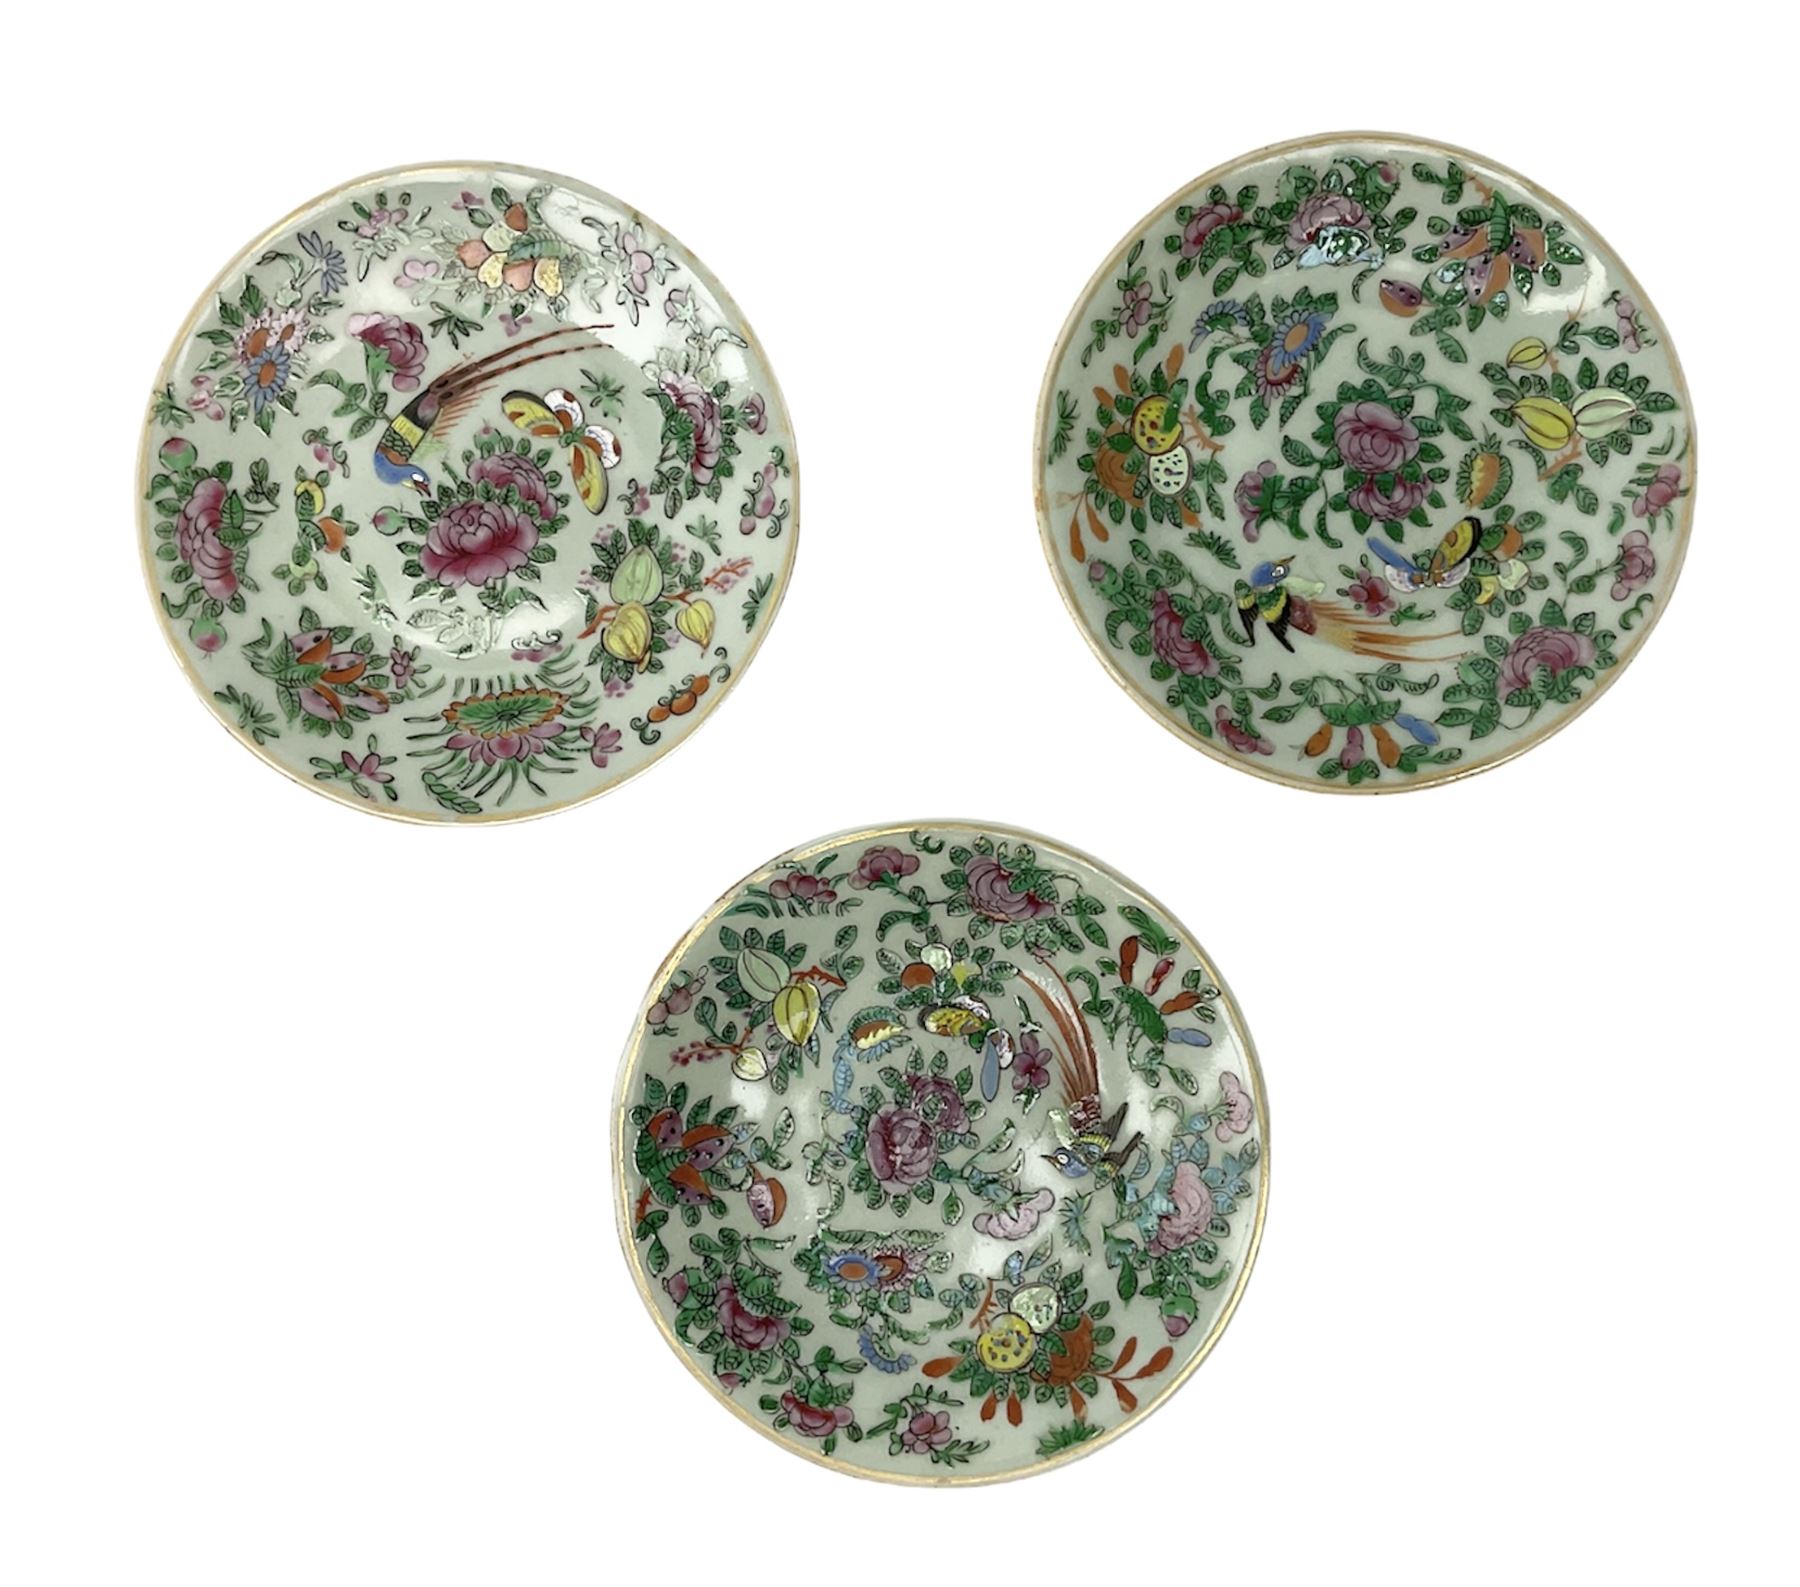 Three Chinese celadon plates decorated in the Famille Rose palette with enamelled birds